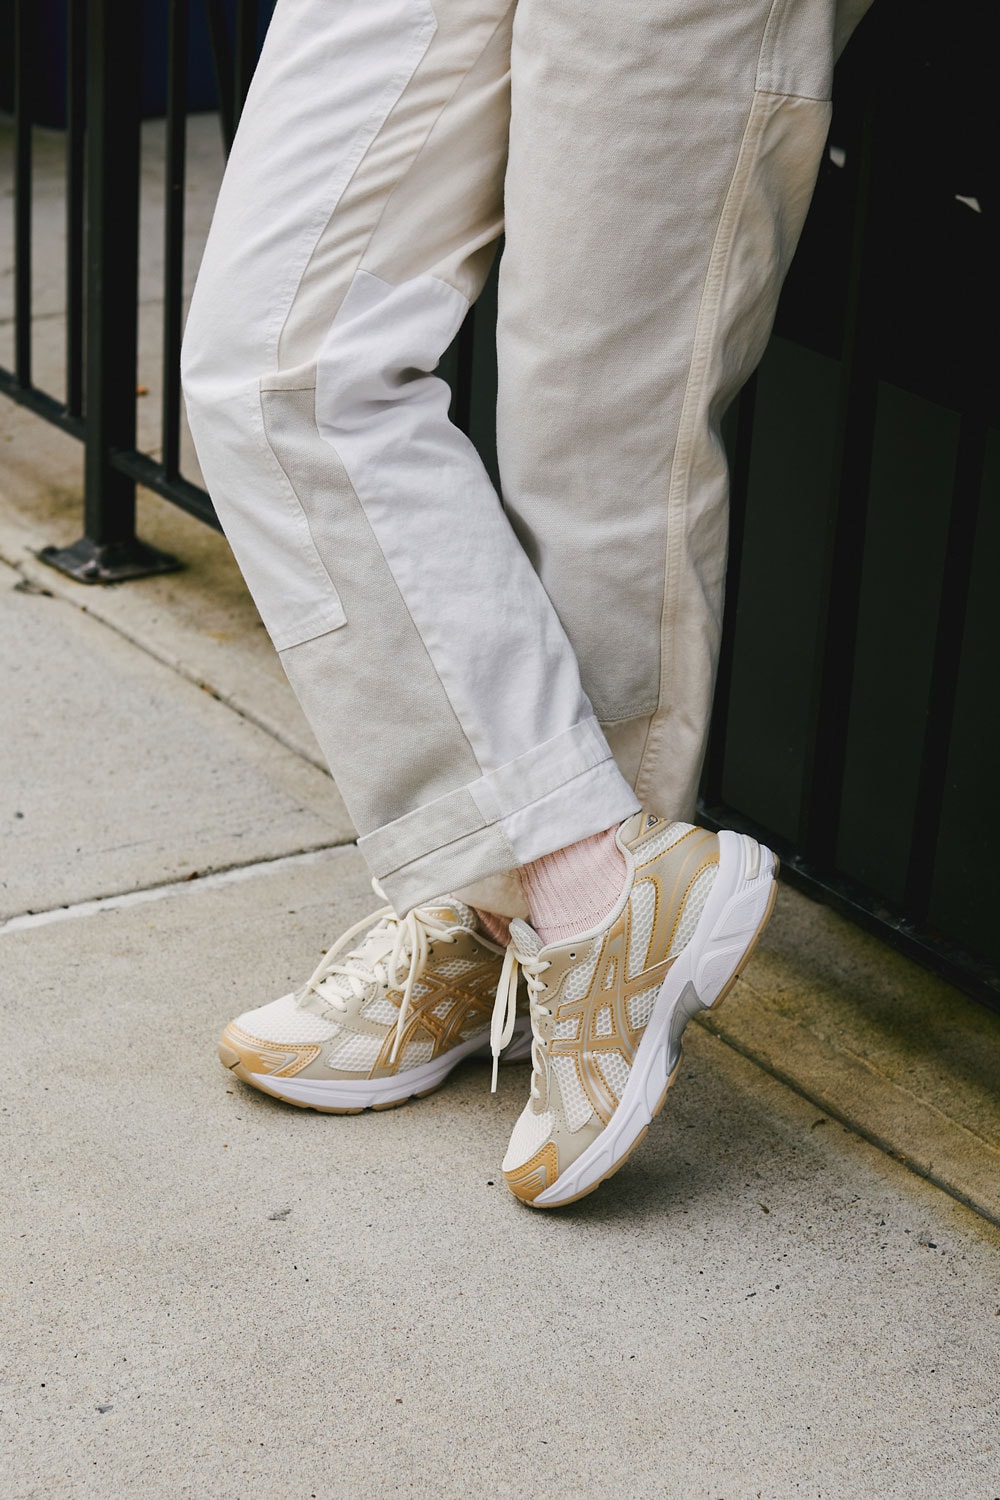 asics her story footwear release gel 1130 campaign collection